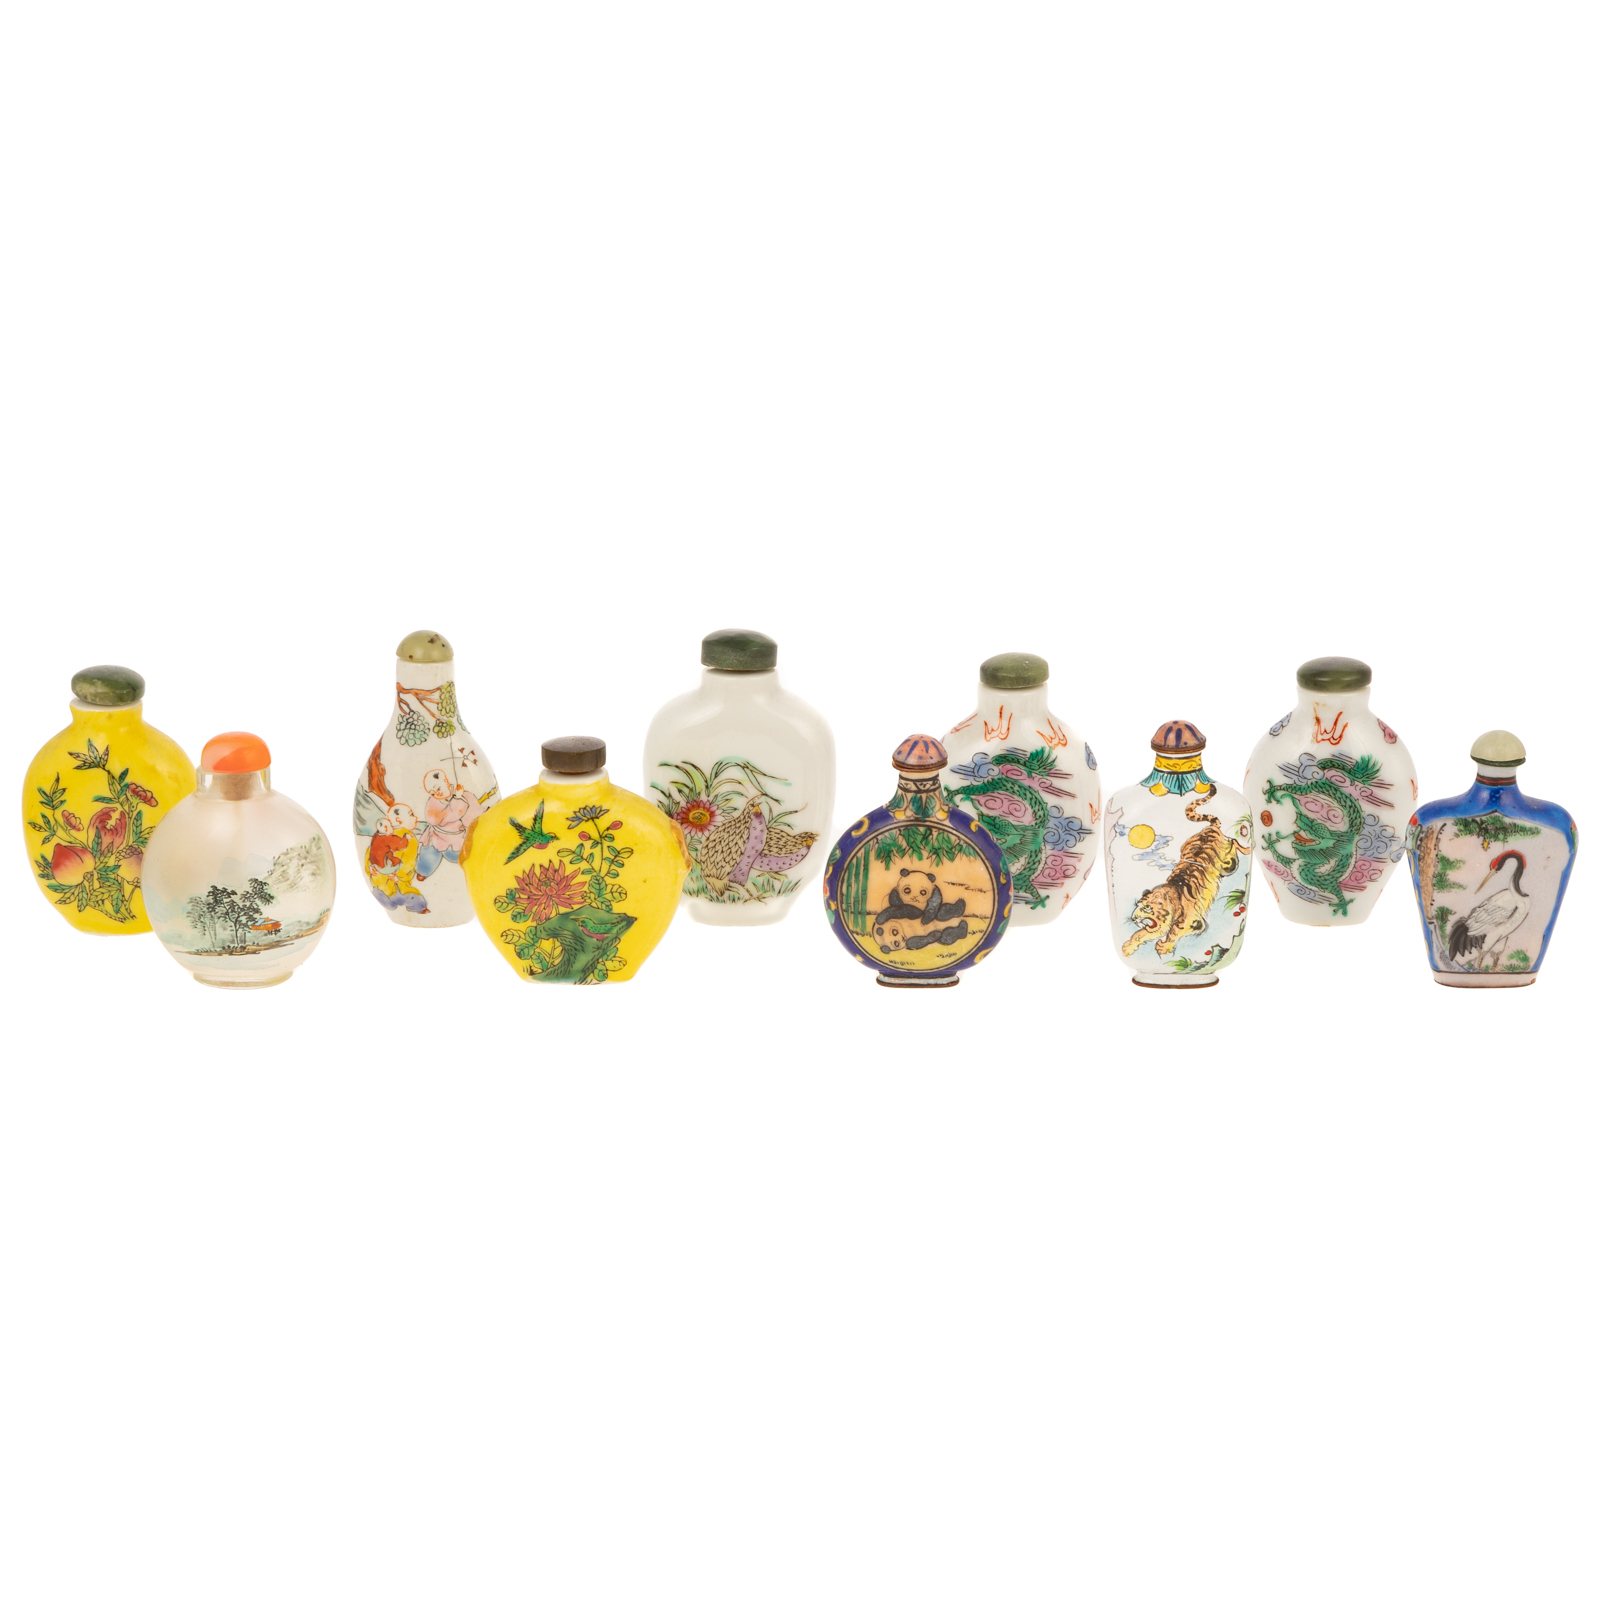 10 ASSORTED CHINESE SNUFF BOTTLES 2ea174